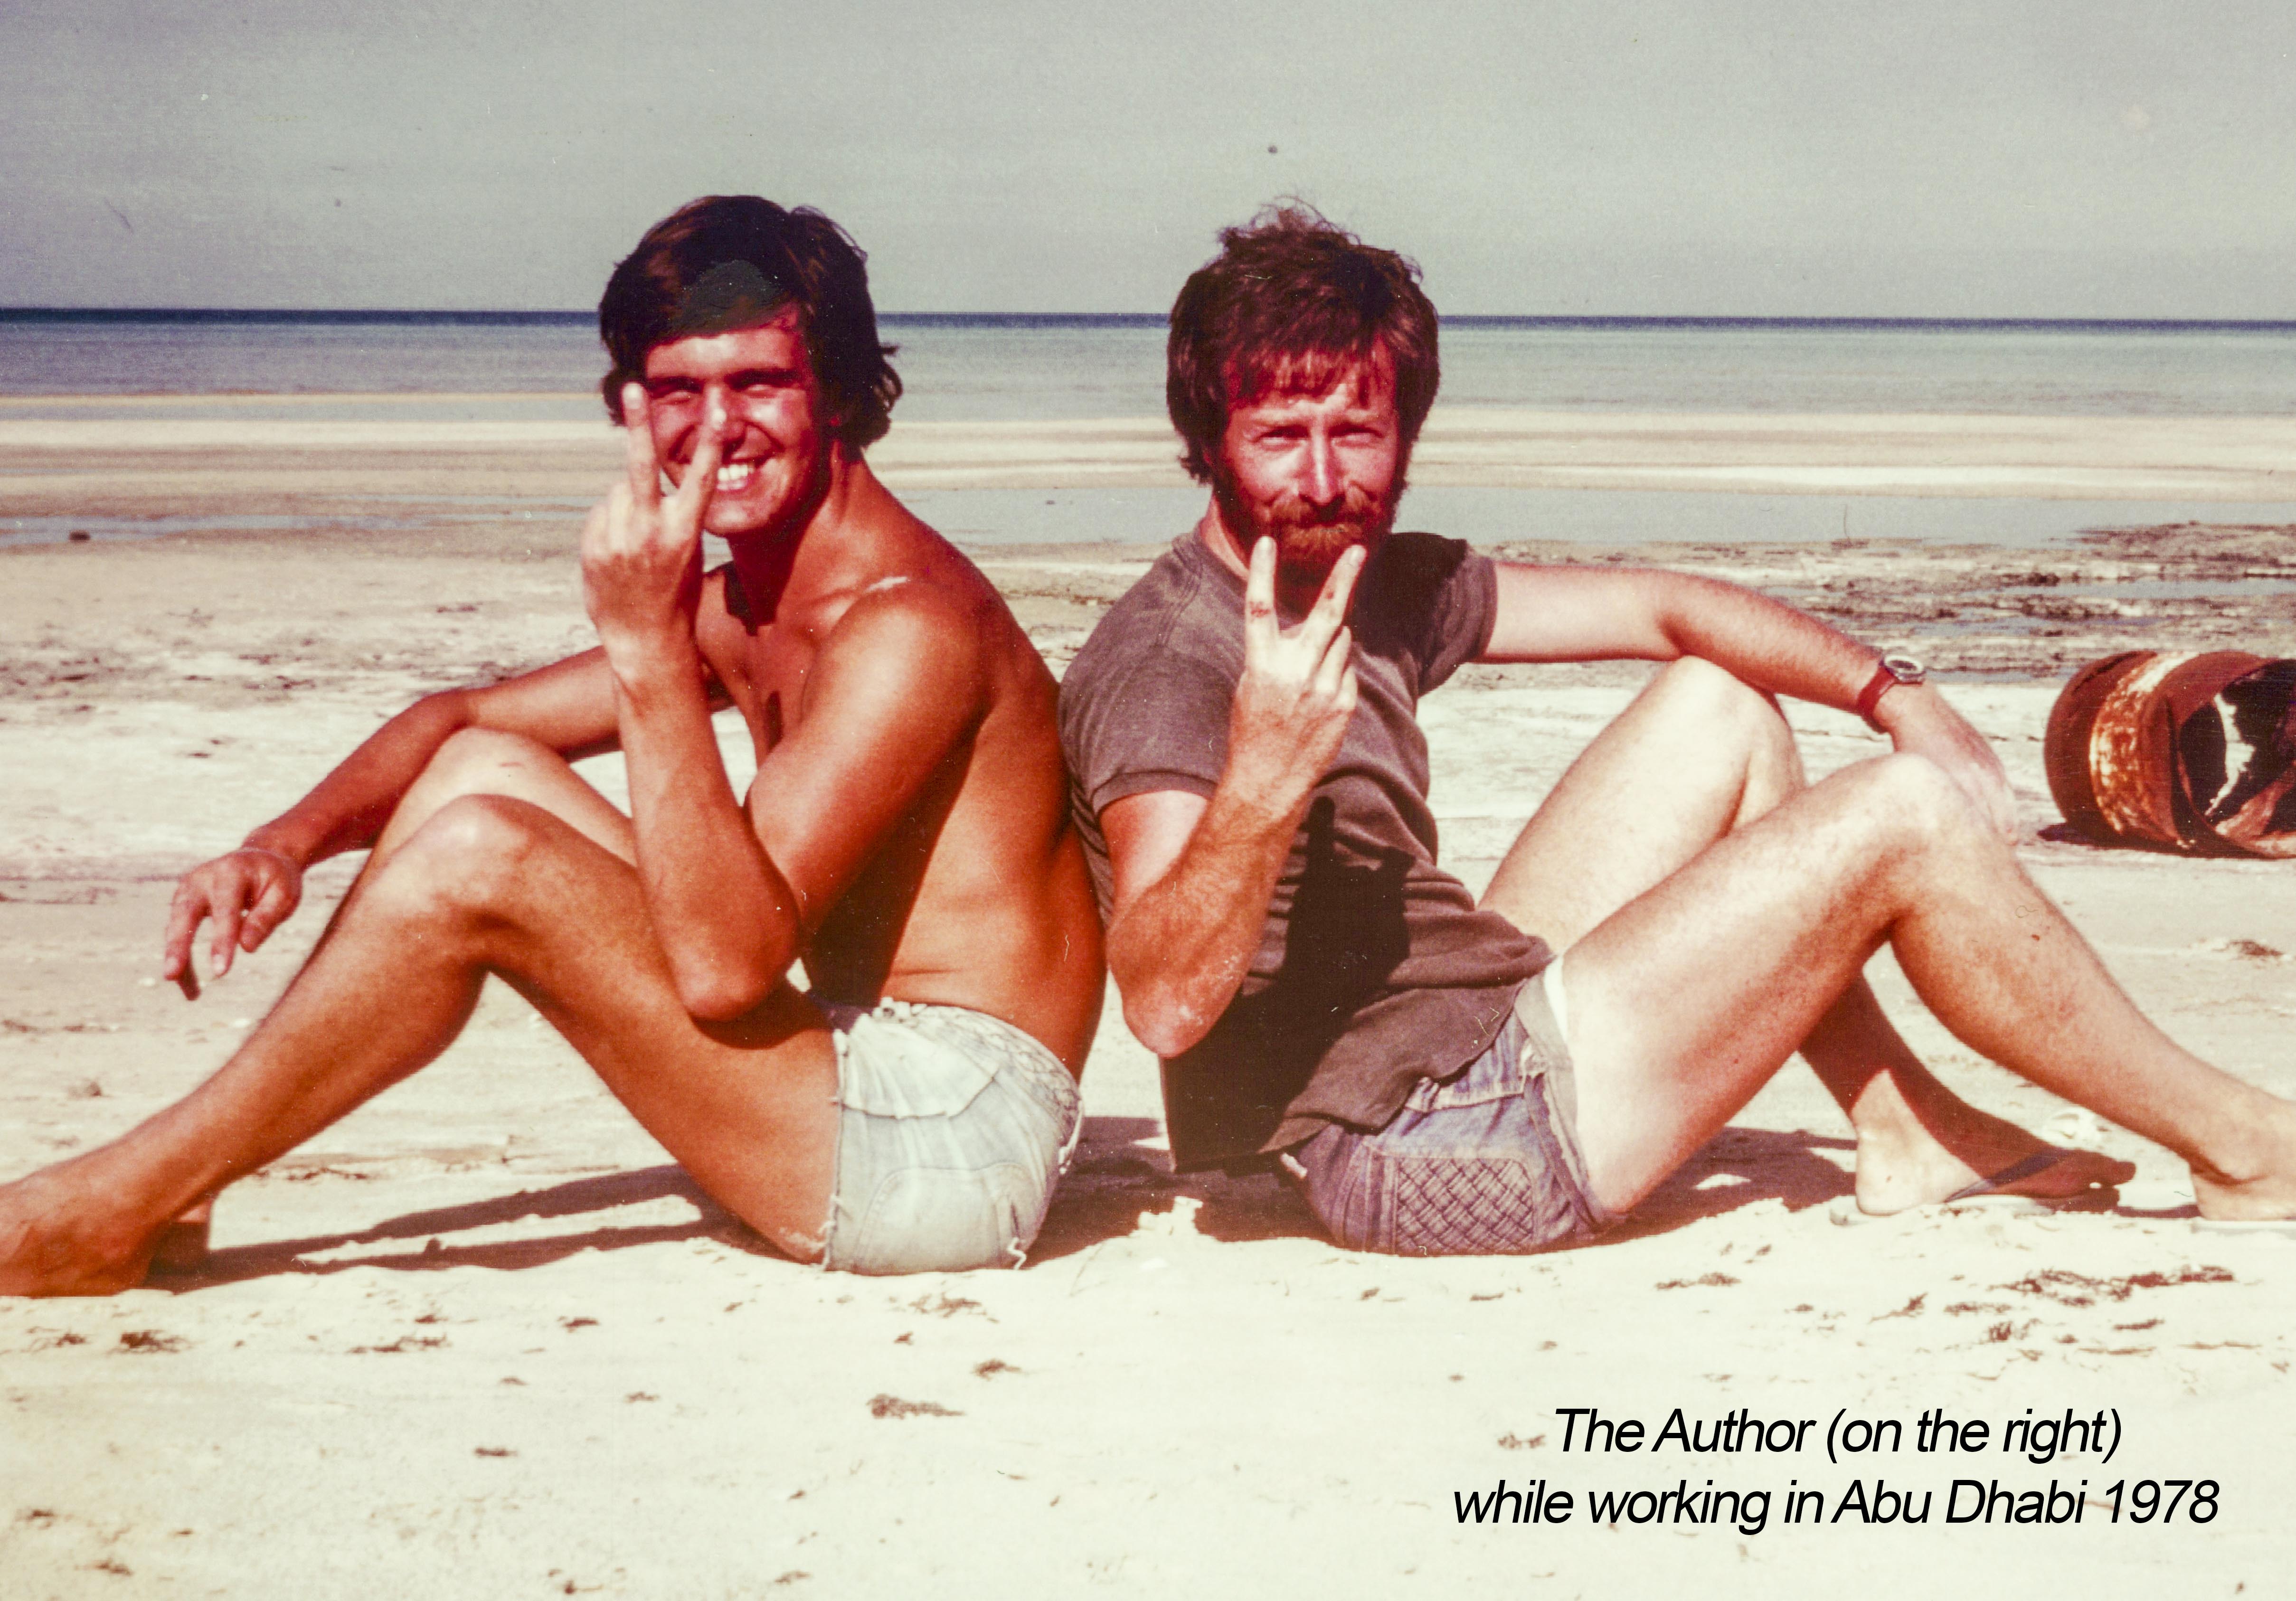 o a . The Author (on the right)
- | while working in Abu Dhabi 1978

-—